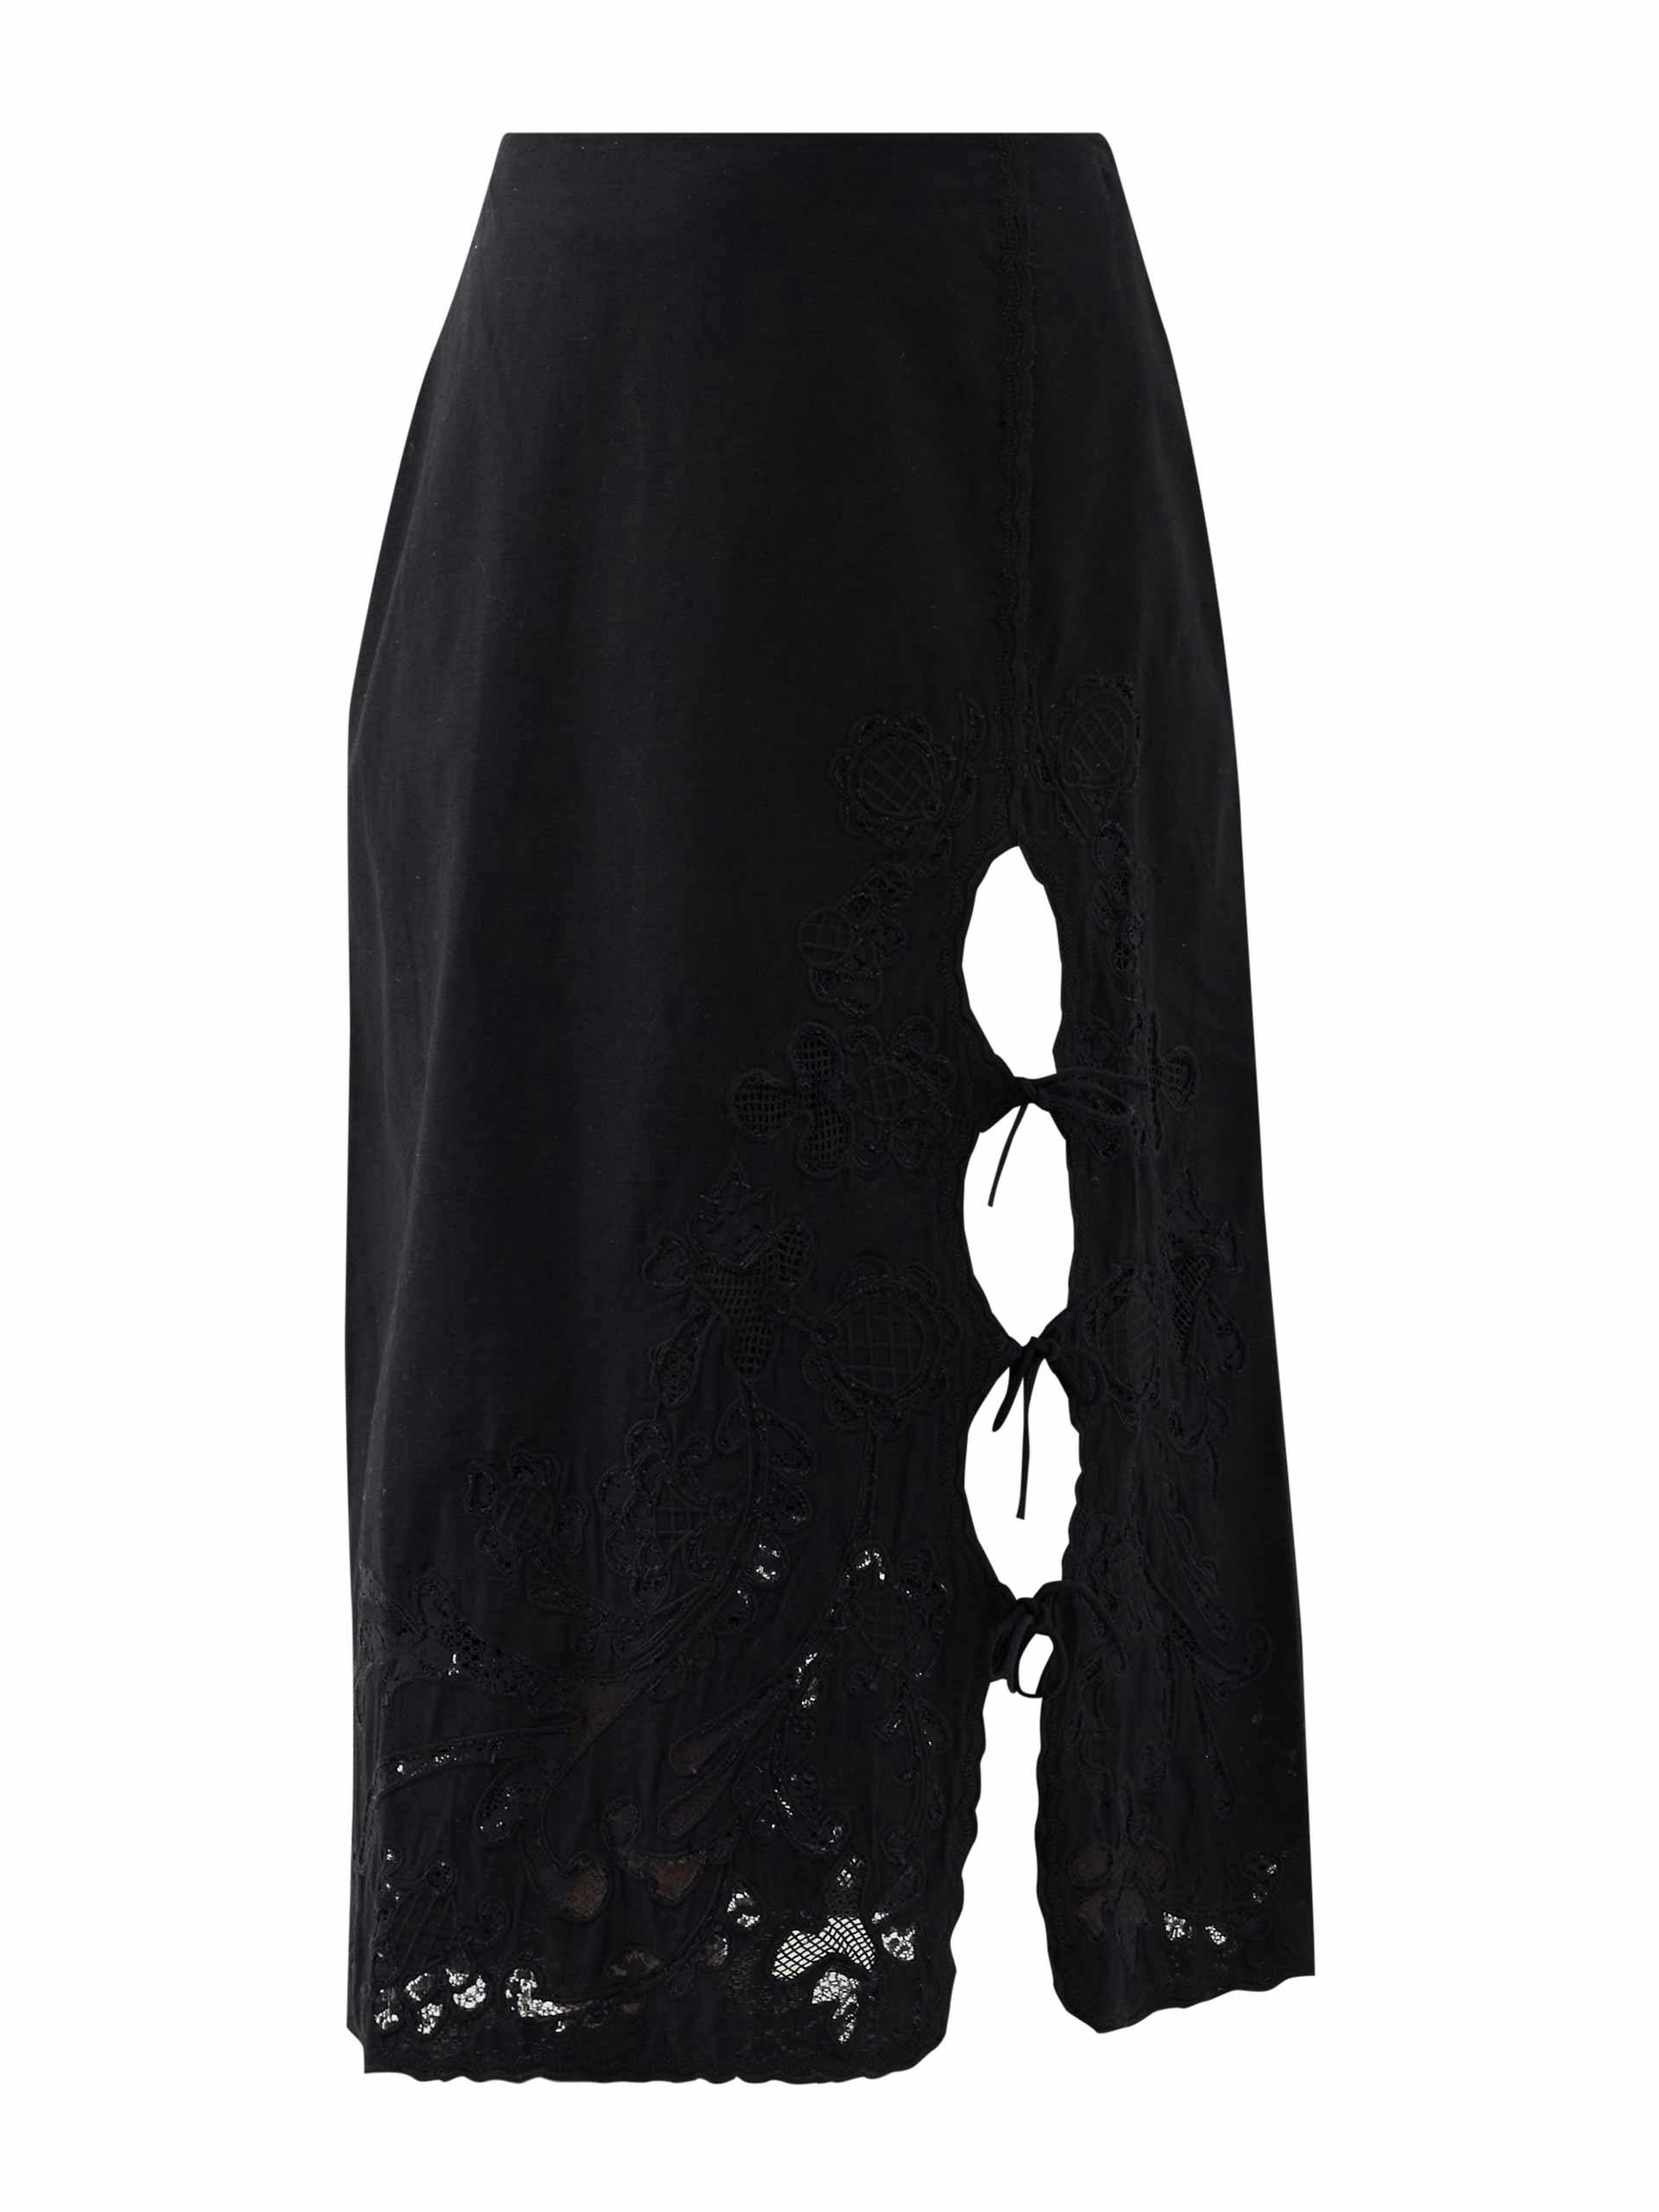 Black tie-front embroidered midi skirt